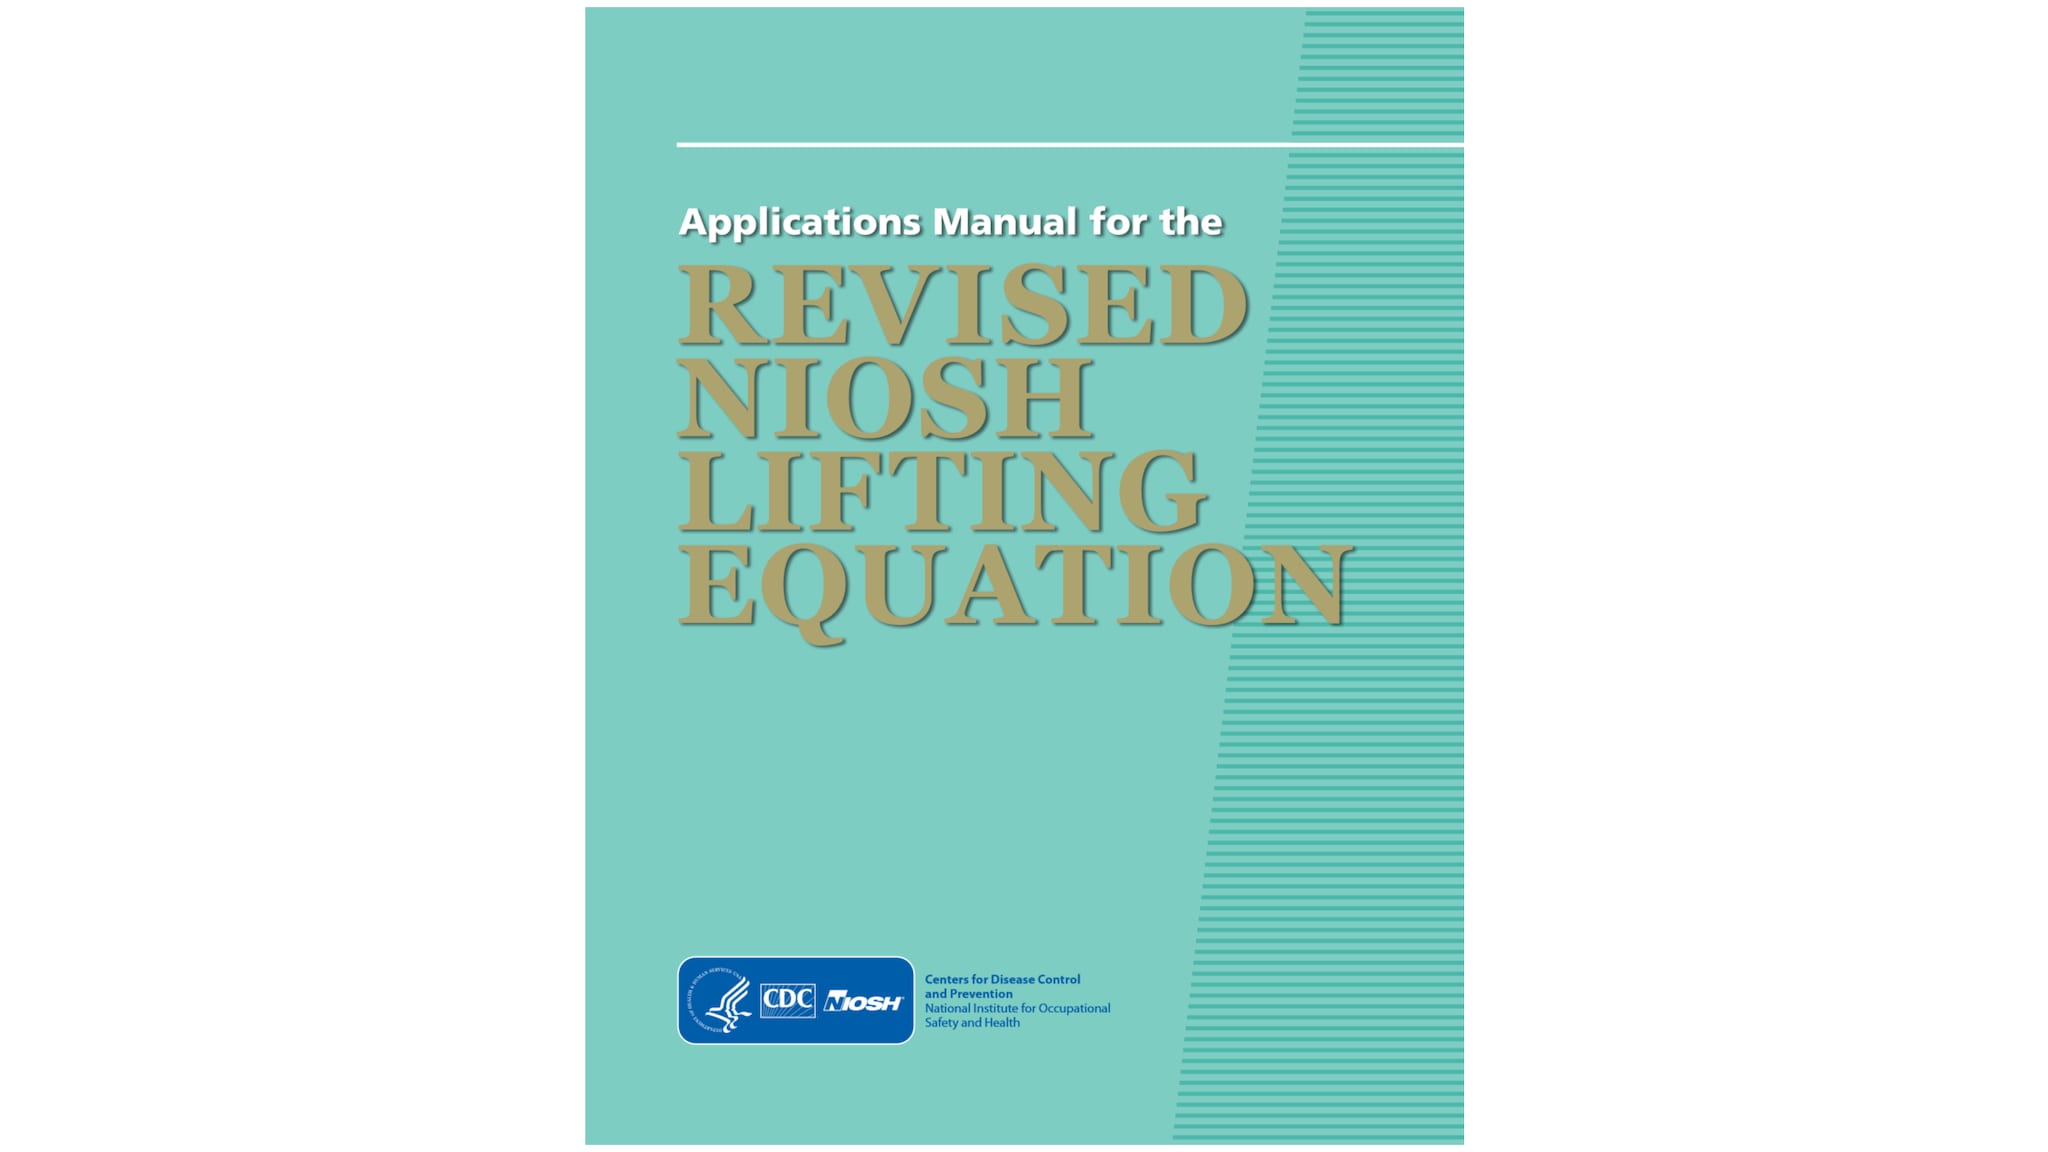 Cover of the Revised NIOSH Lifting Equation manual